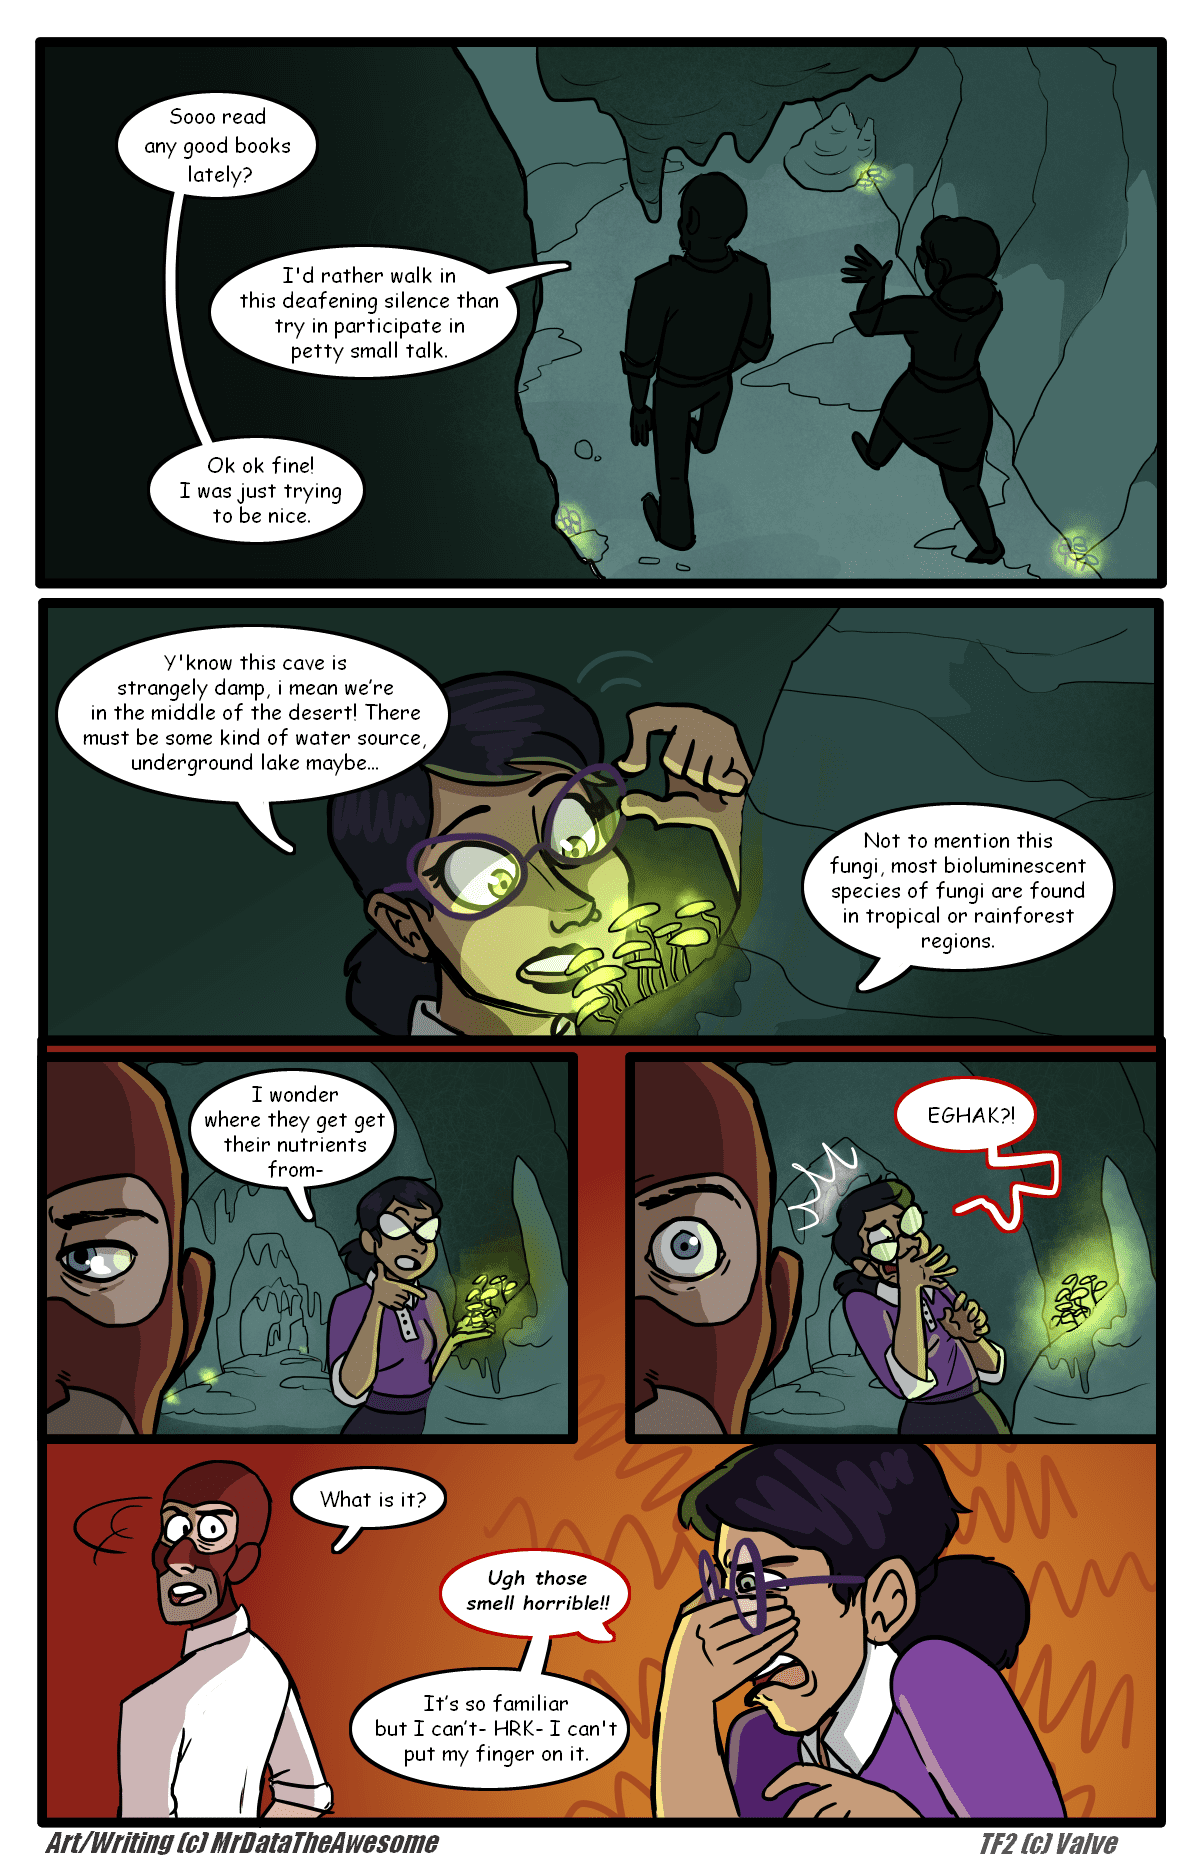 TF2 After Hours , Page #18 by MrDataTheAwesome on DeviantArt